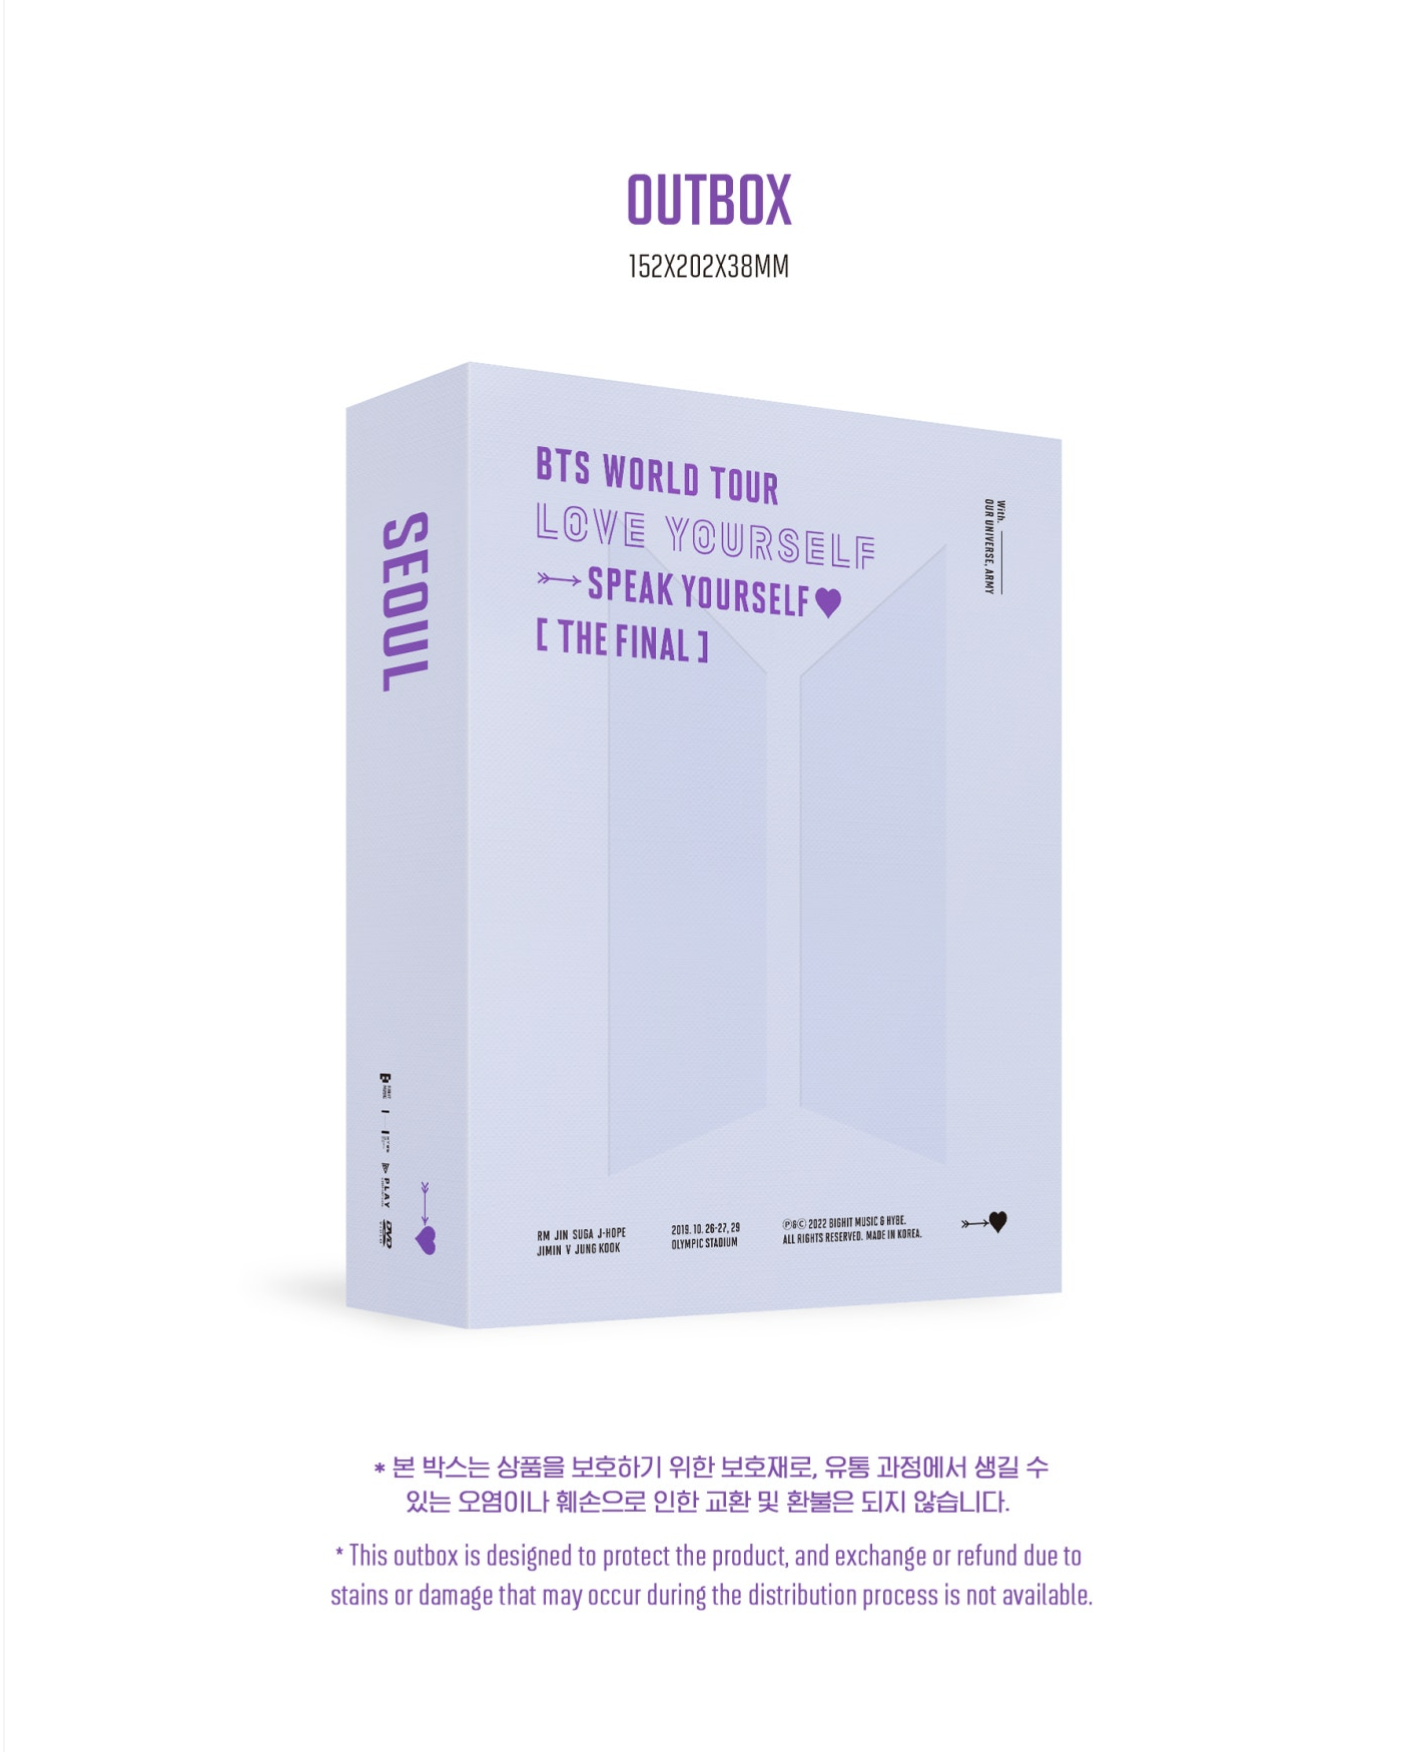 DVD] LOVE YOURSELF : SPEAK YOURSELF' [THE FINAL] — US BTS ARMY